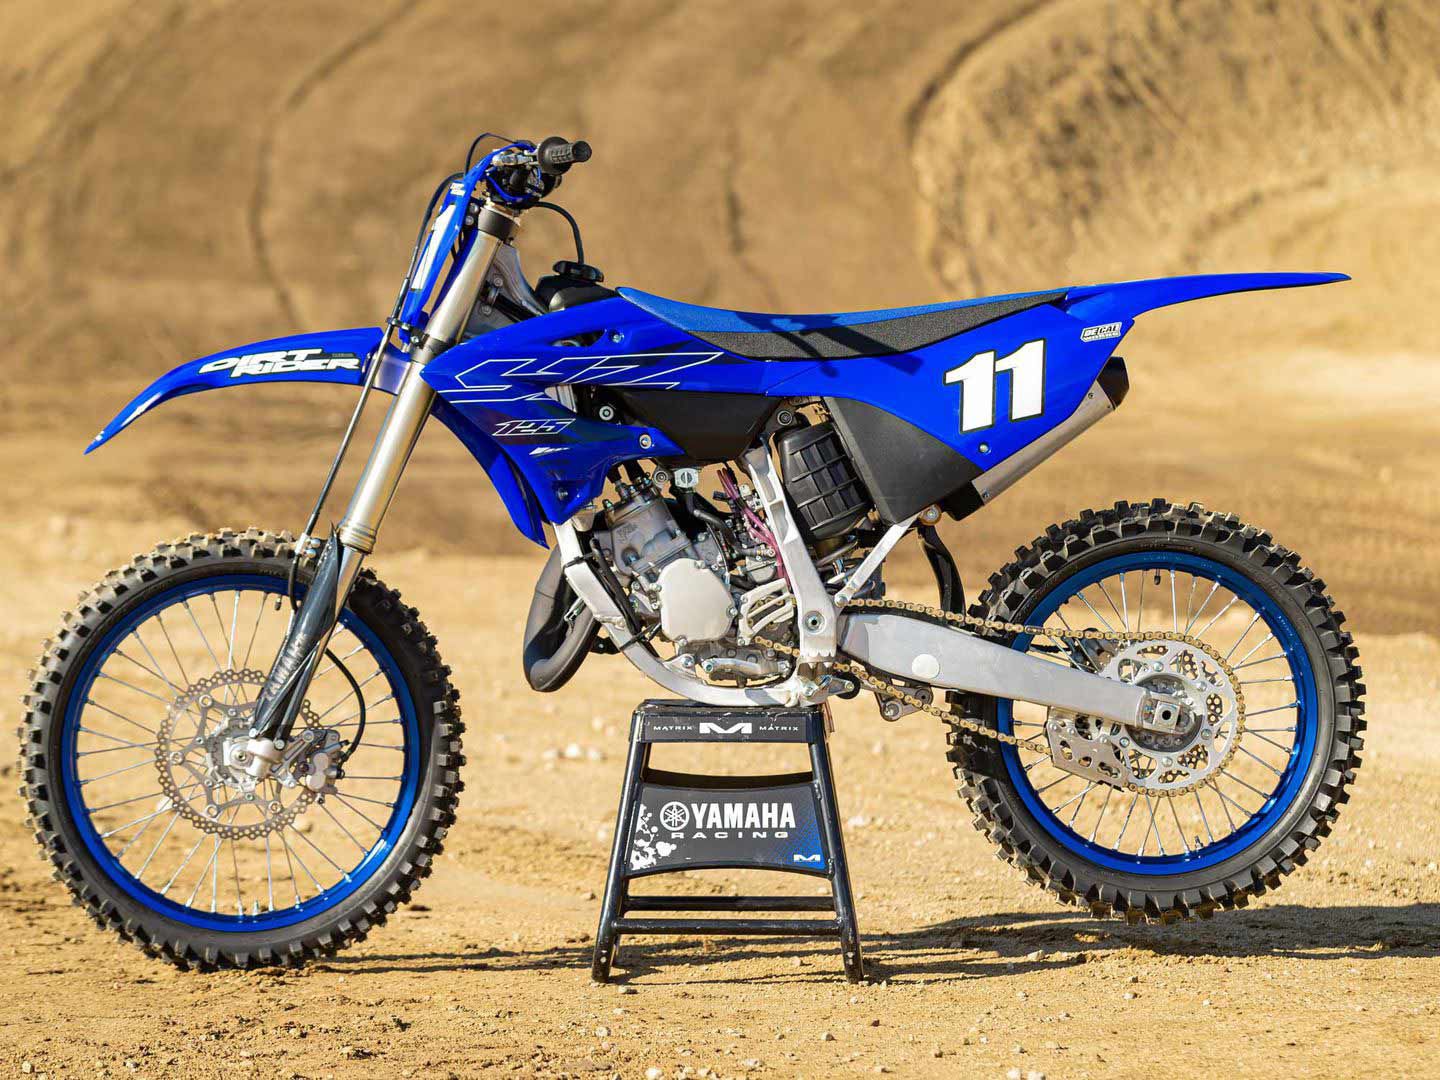 Despite receiving a slew of updates, the 2022 YZ125 costs just $300 more than the 2021 model. Suggested retail price is $6,899.